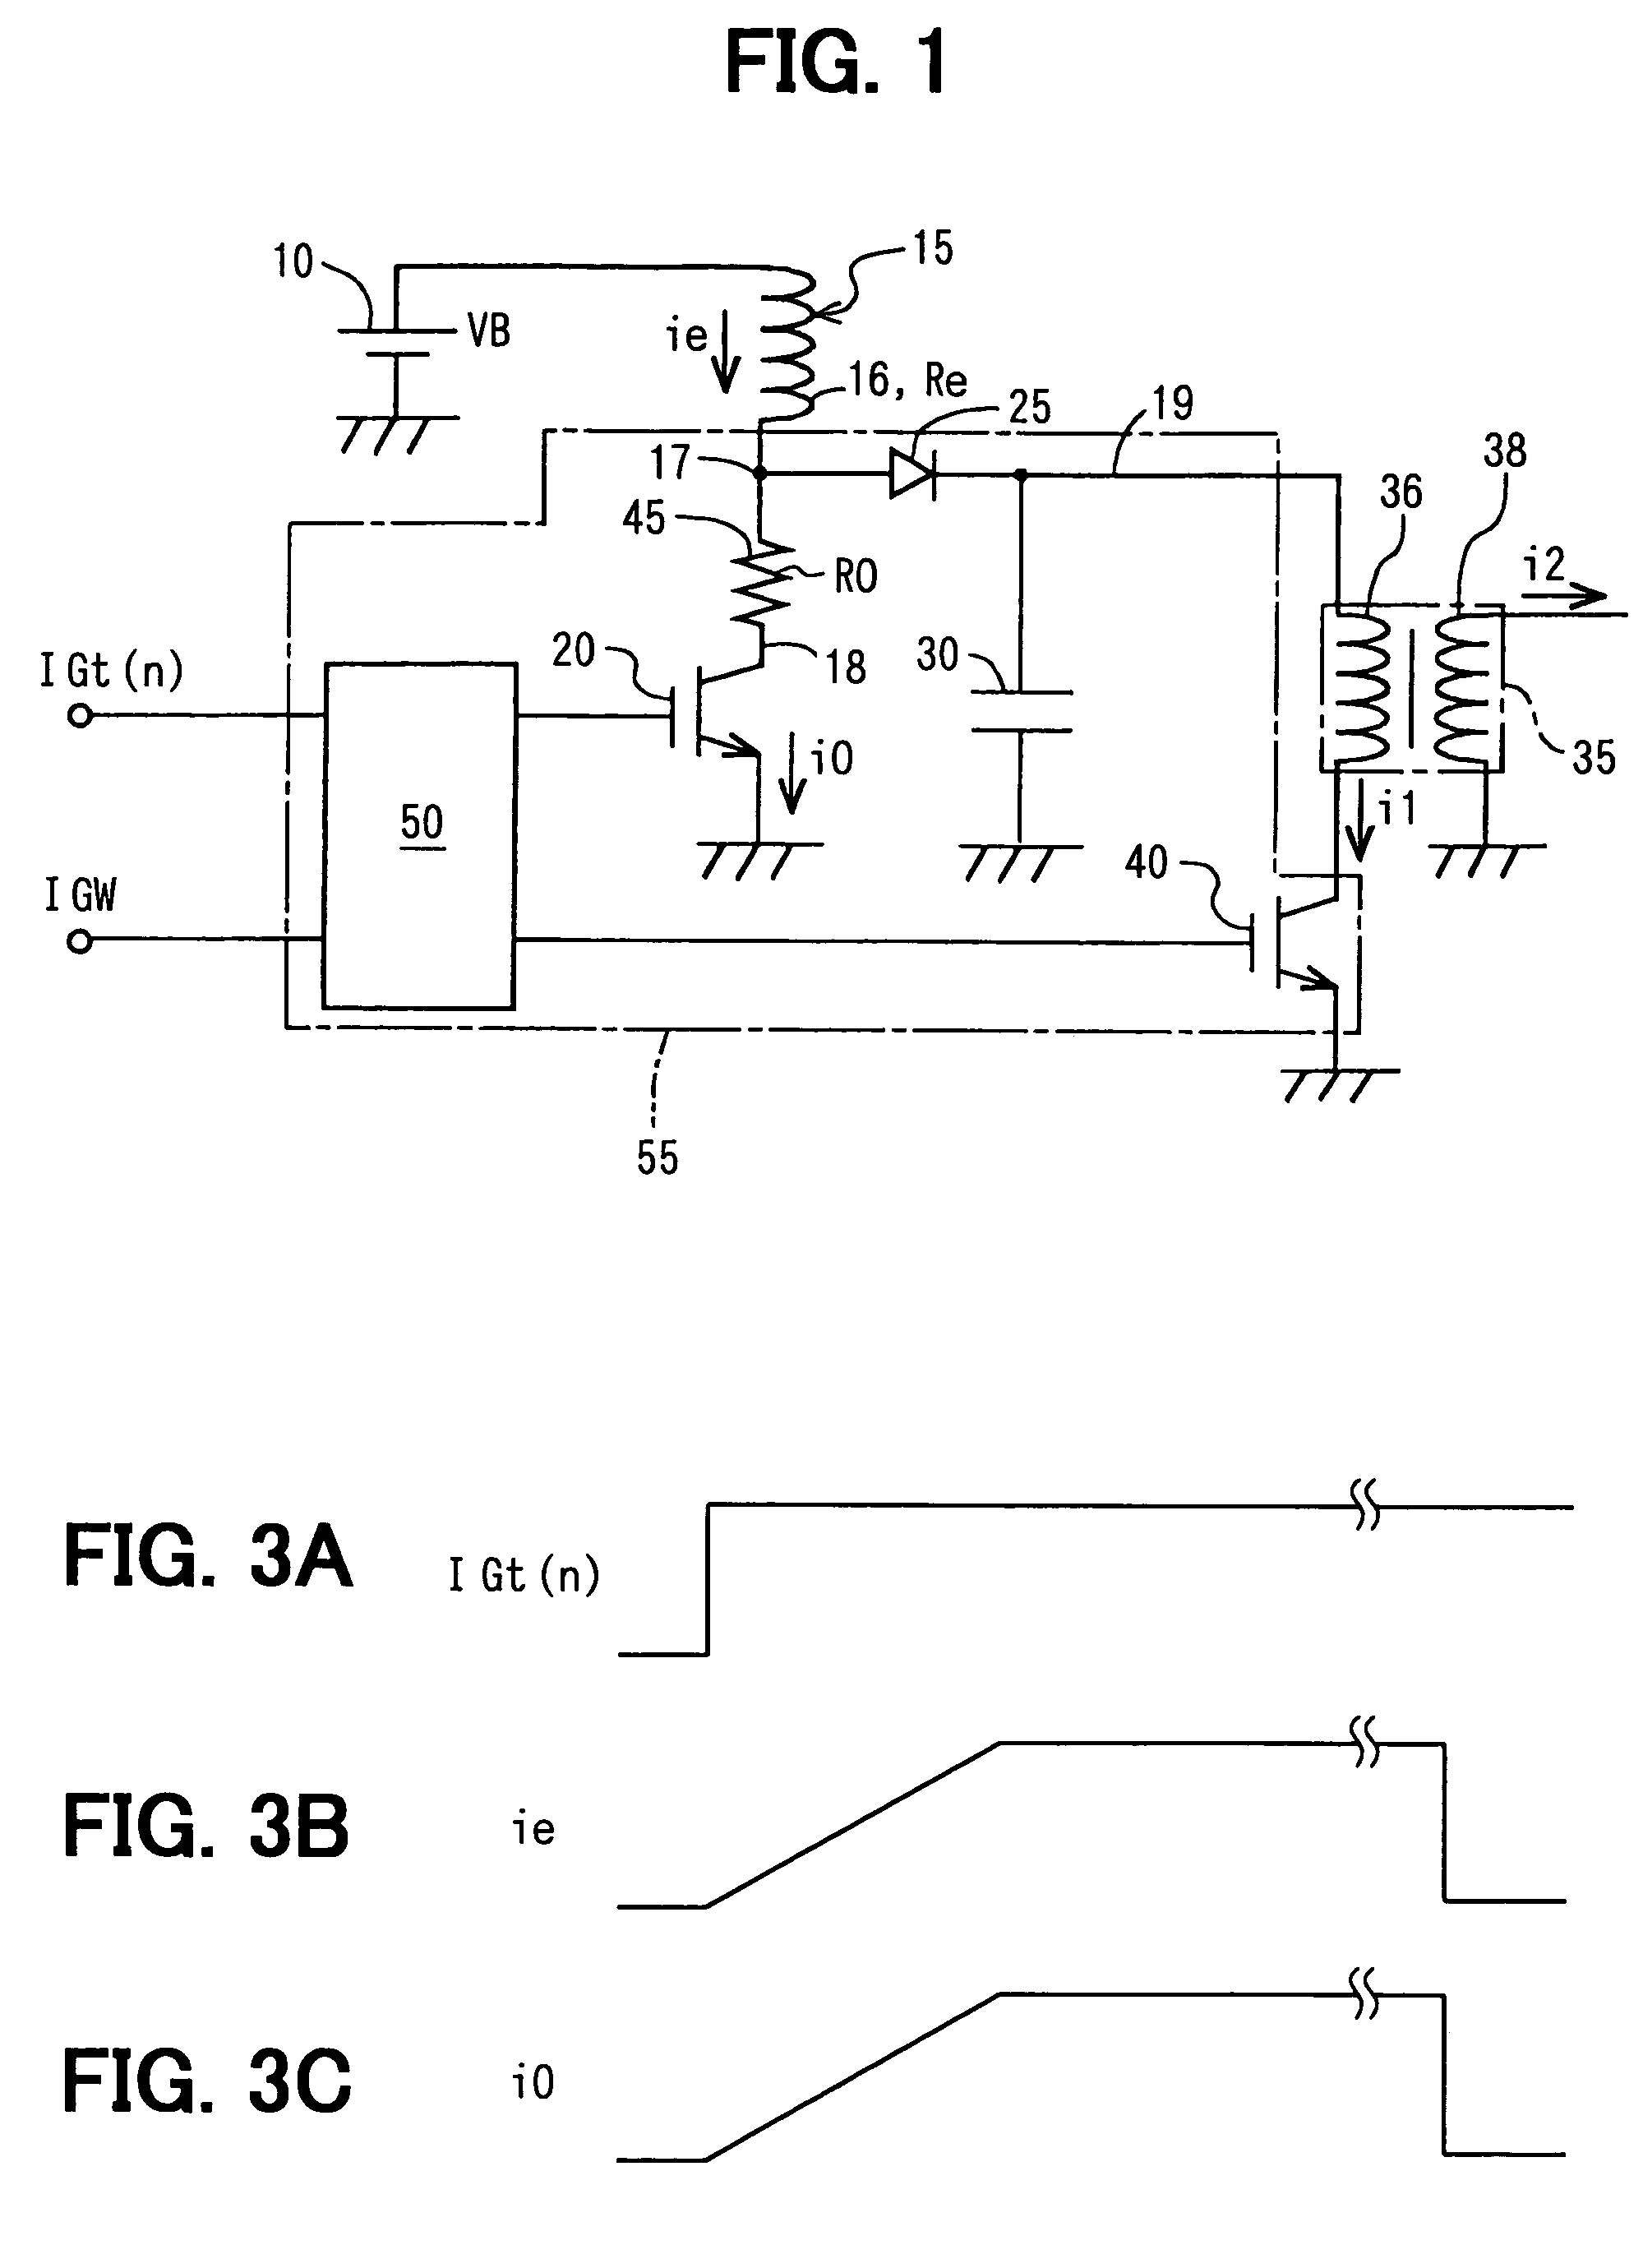 Multi-spark type ignition system